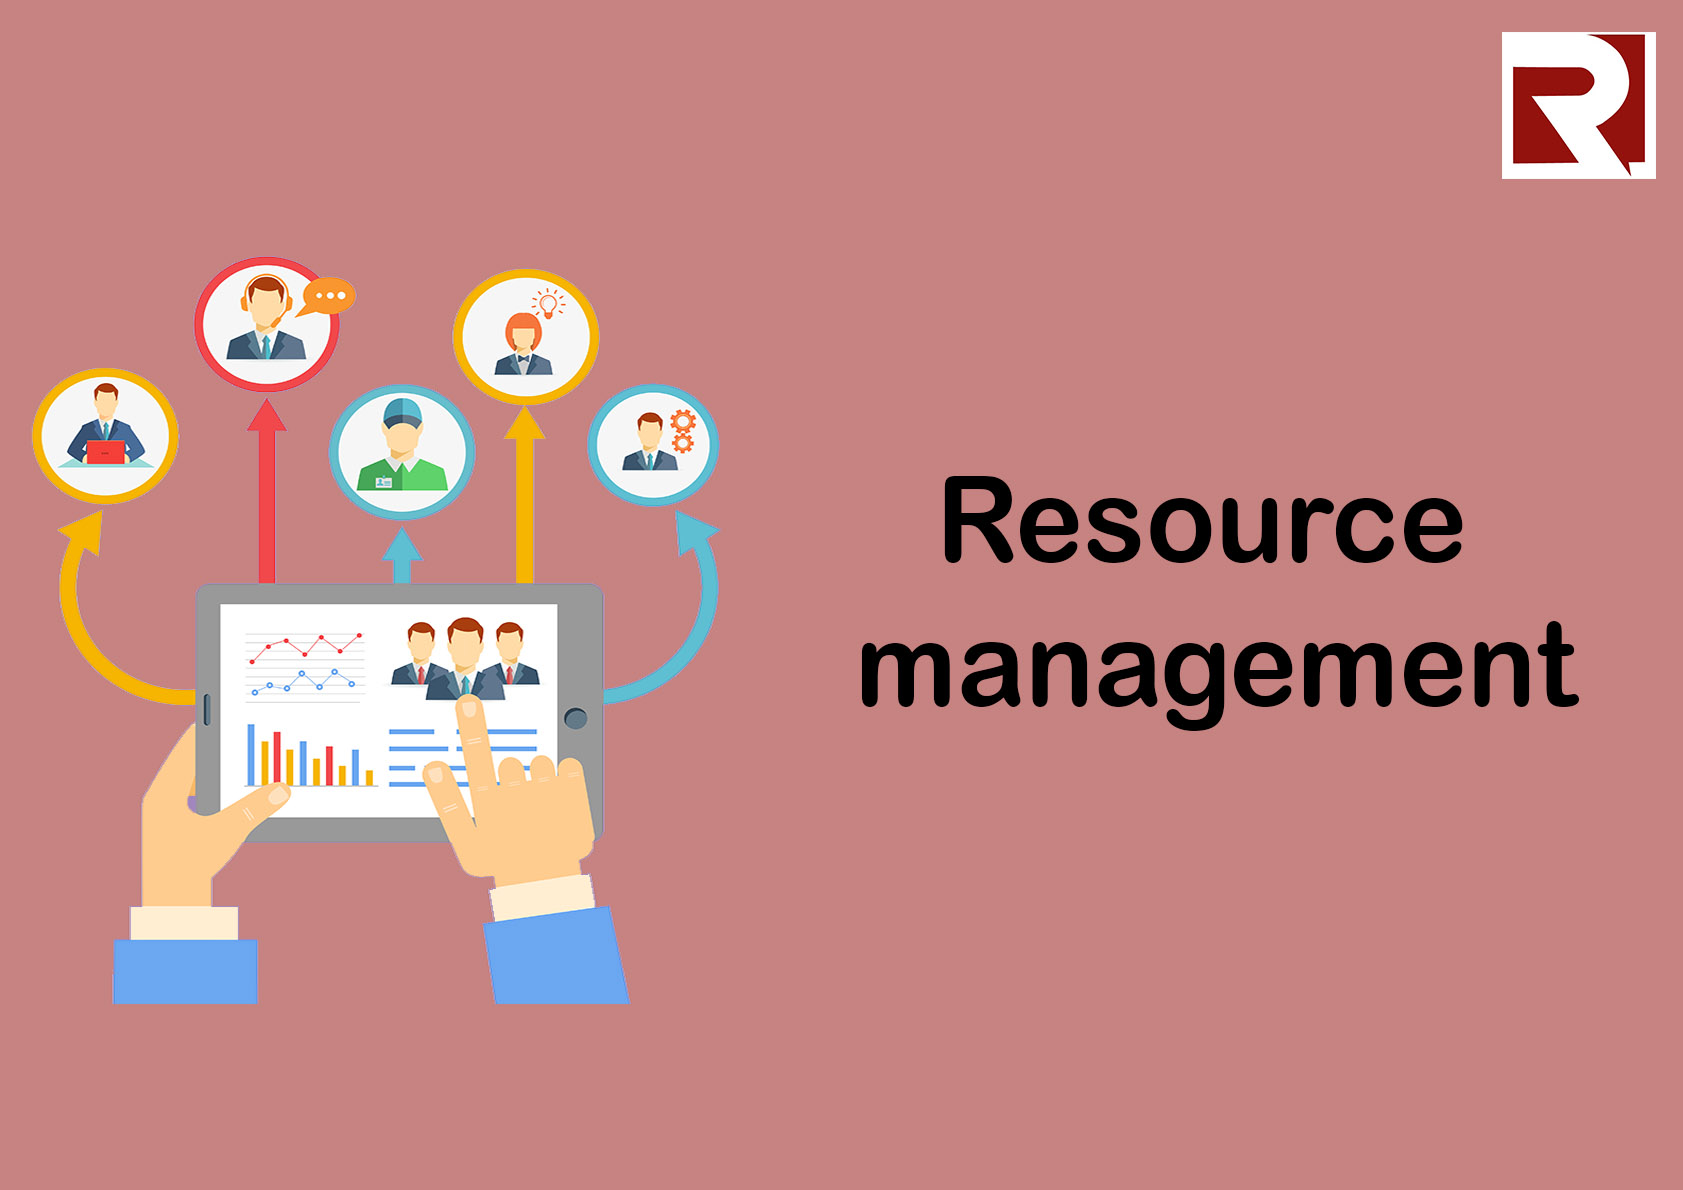 A Quick Look at Resource Management